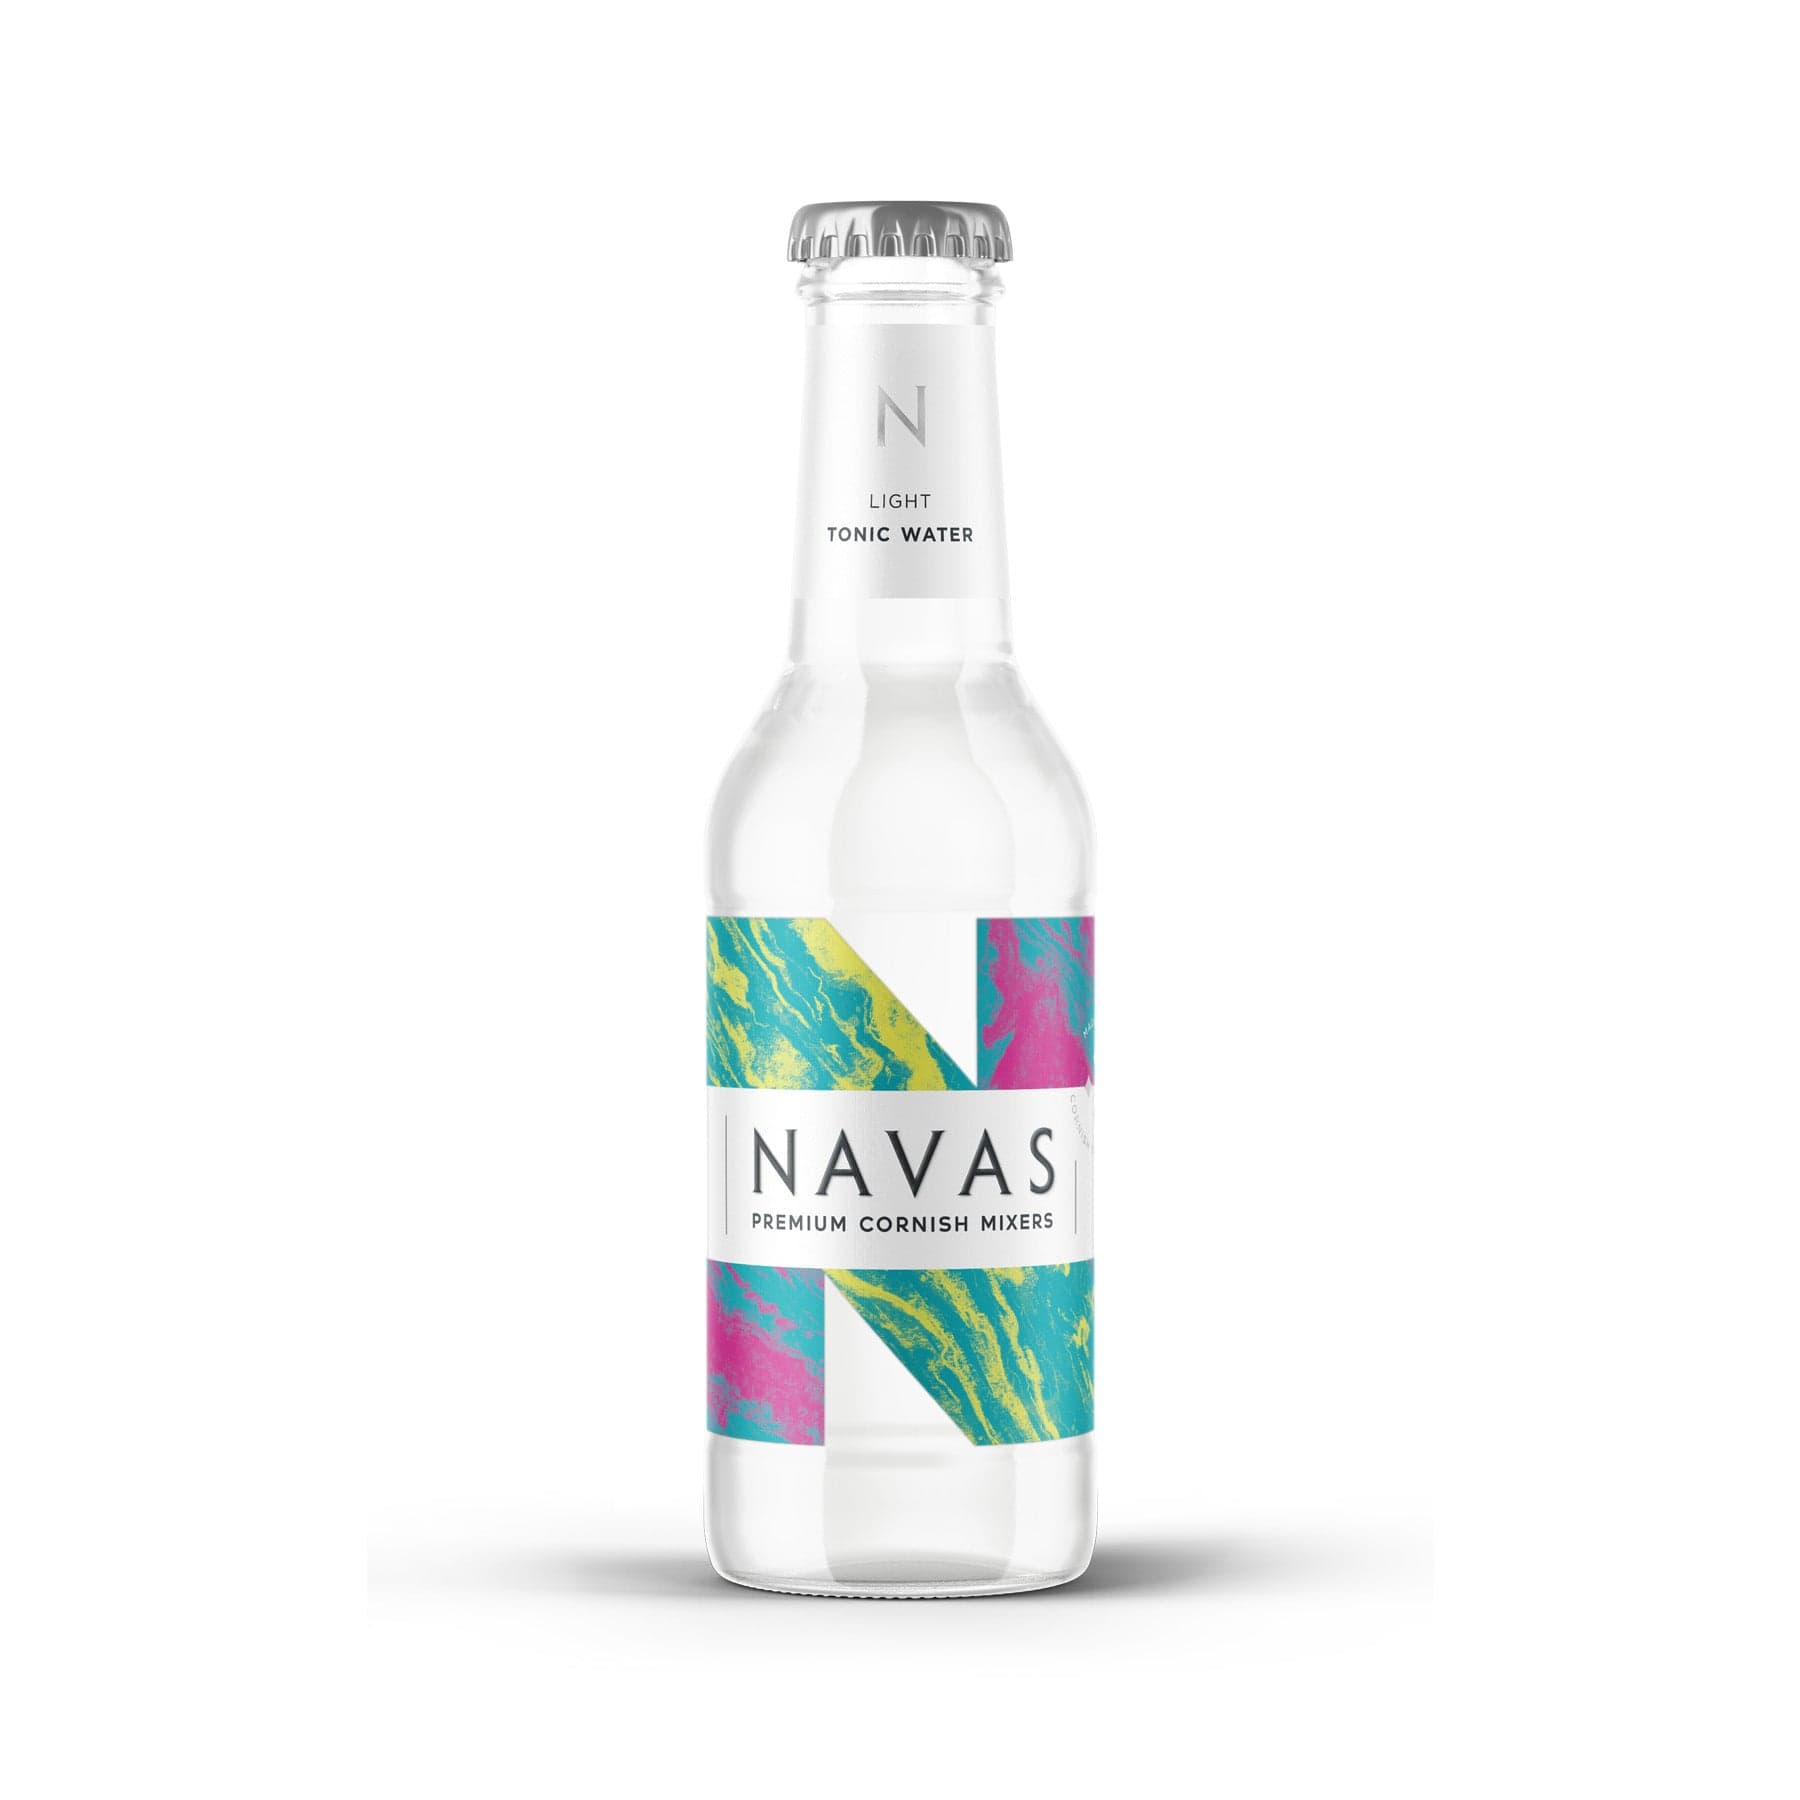 Clear glass bottle of Navas Light Tonic Water with colorful abstract label design, premium Cornish mixers branding, isolated on white background.